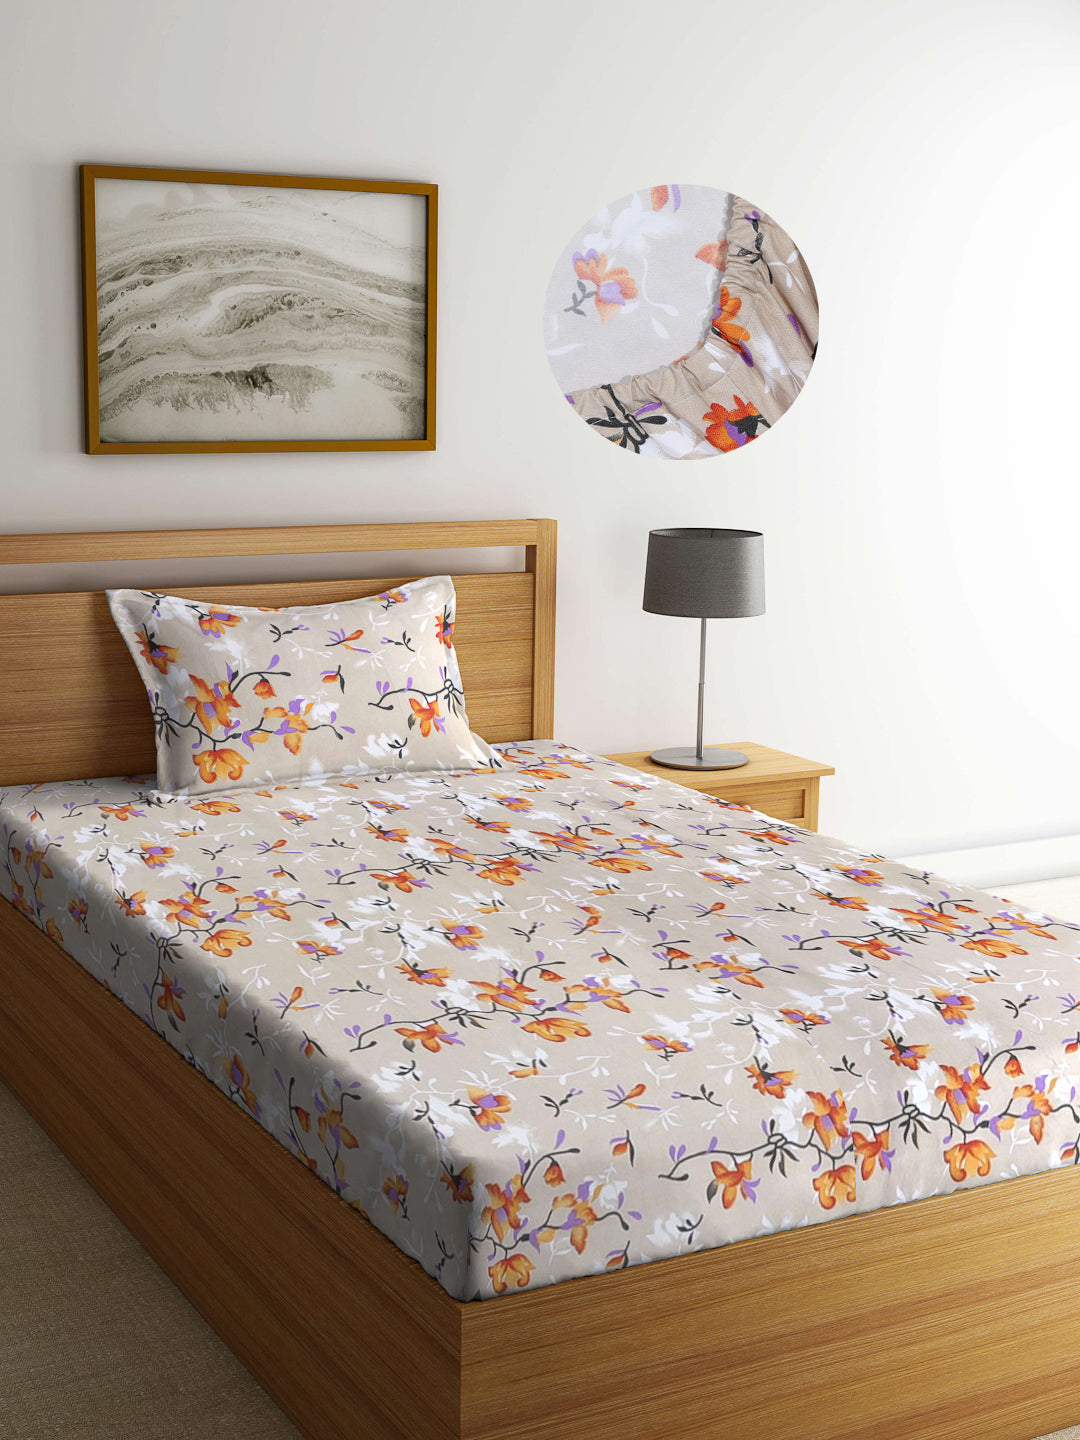 Arrabi Beige Floral TC Cotton Blend Single Size Fitted Bedsheet with 1 Pillow Cover (220 X 150 cm)